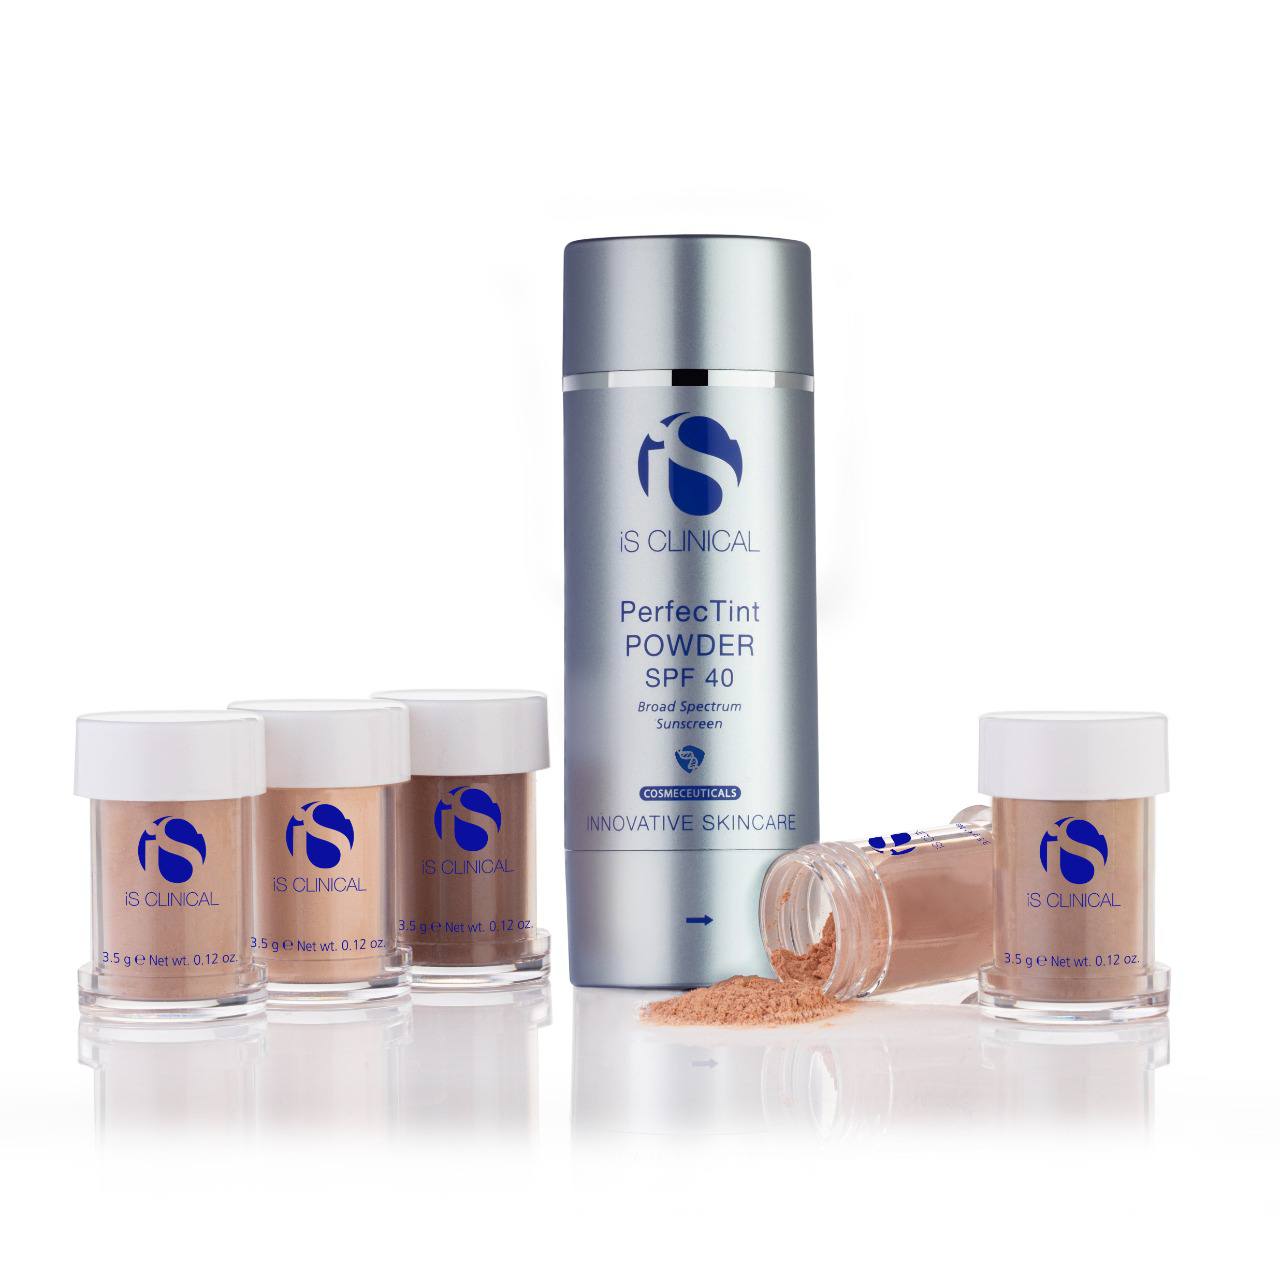 IS Clinical PerfecTint Powder SPF 40